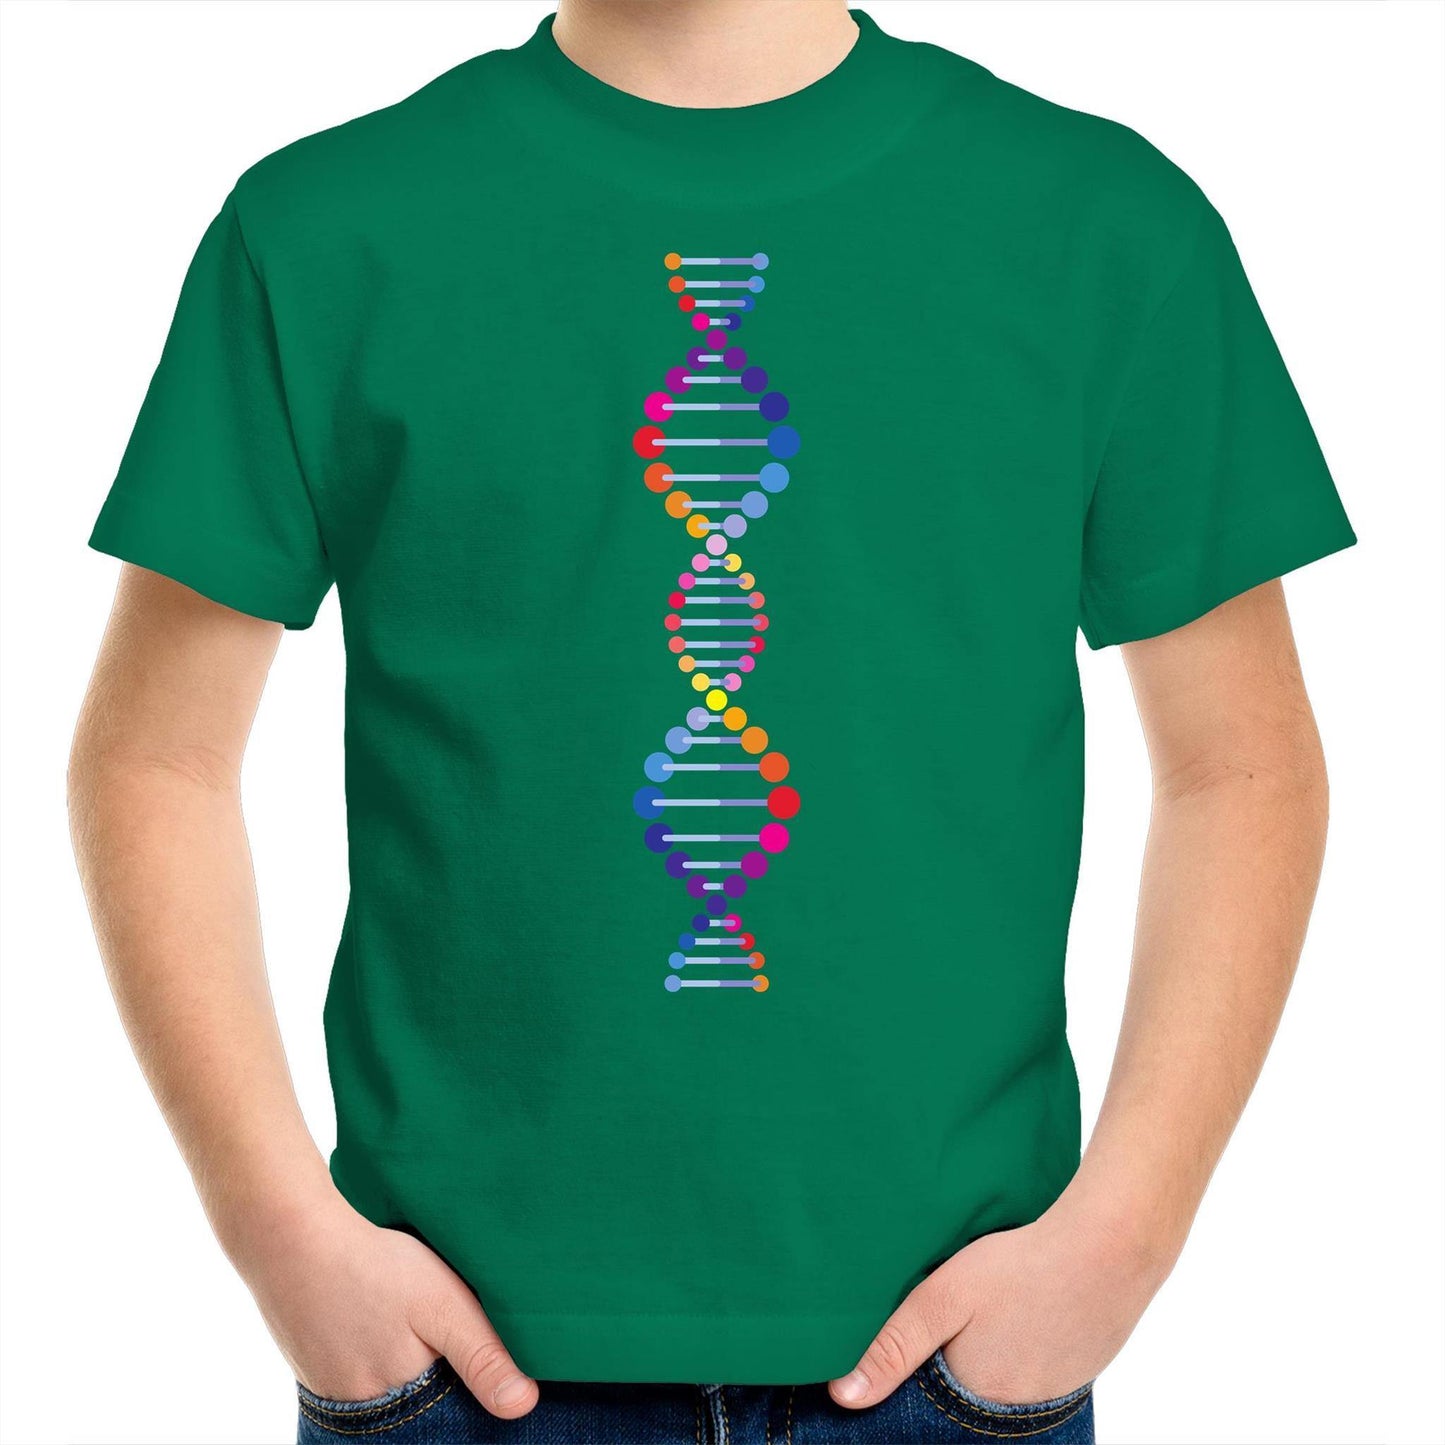 DNA - Kids Youth Crew T-Shirt Kelly Green Kids Youth T-shirt Science